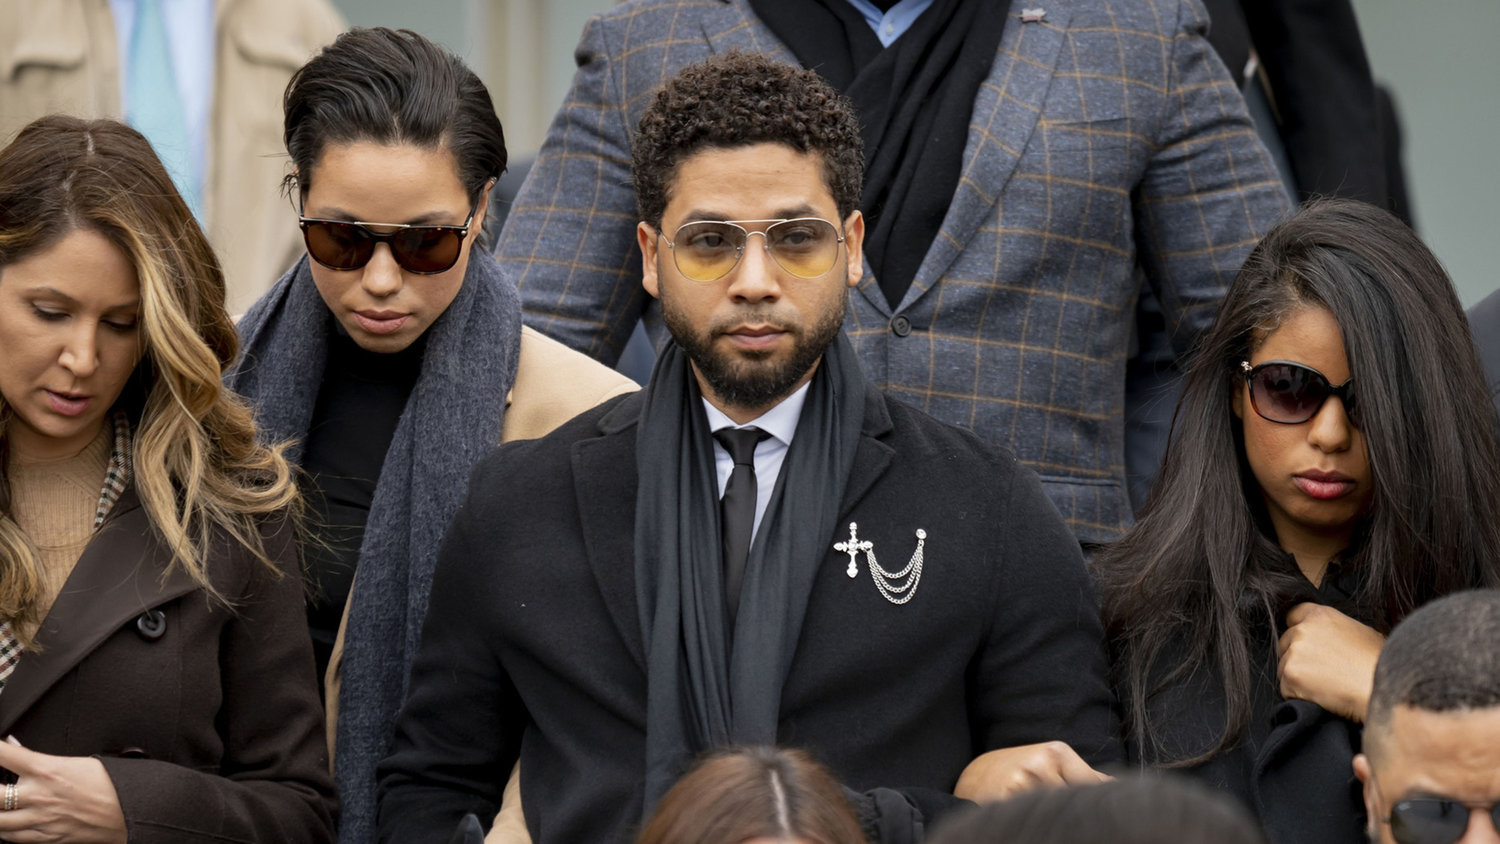 Jussie Smollett departs after a court appearance Monday, Feb. 24, 2020 at the Leighton Criminal Courts Building in Chicago. (Brian Cassella/Chicago Tribune/TNS)